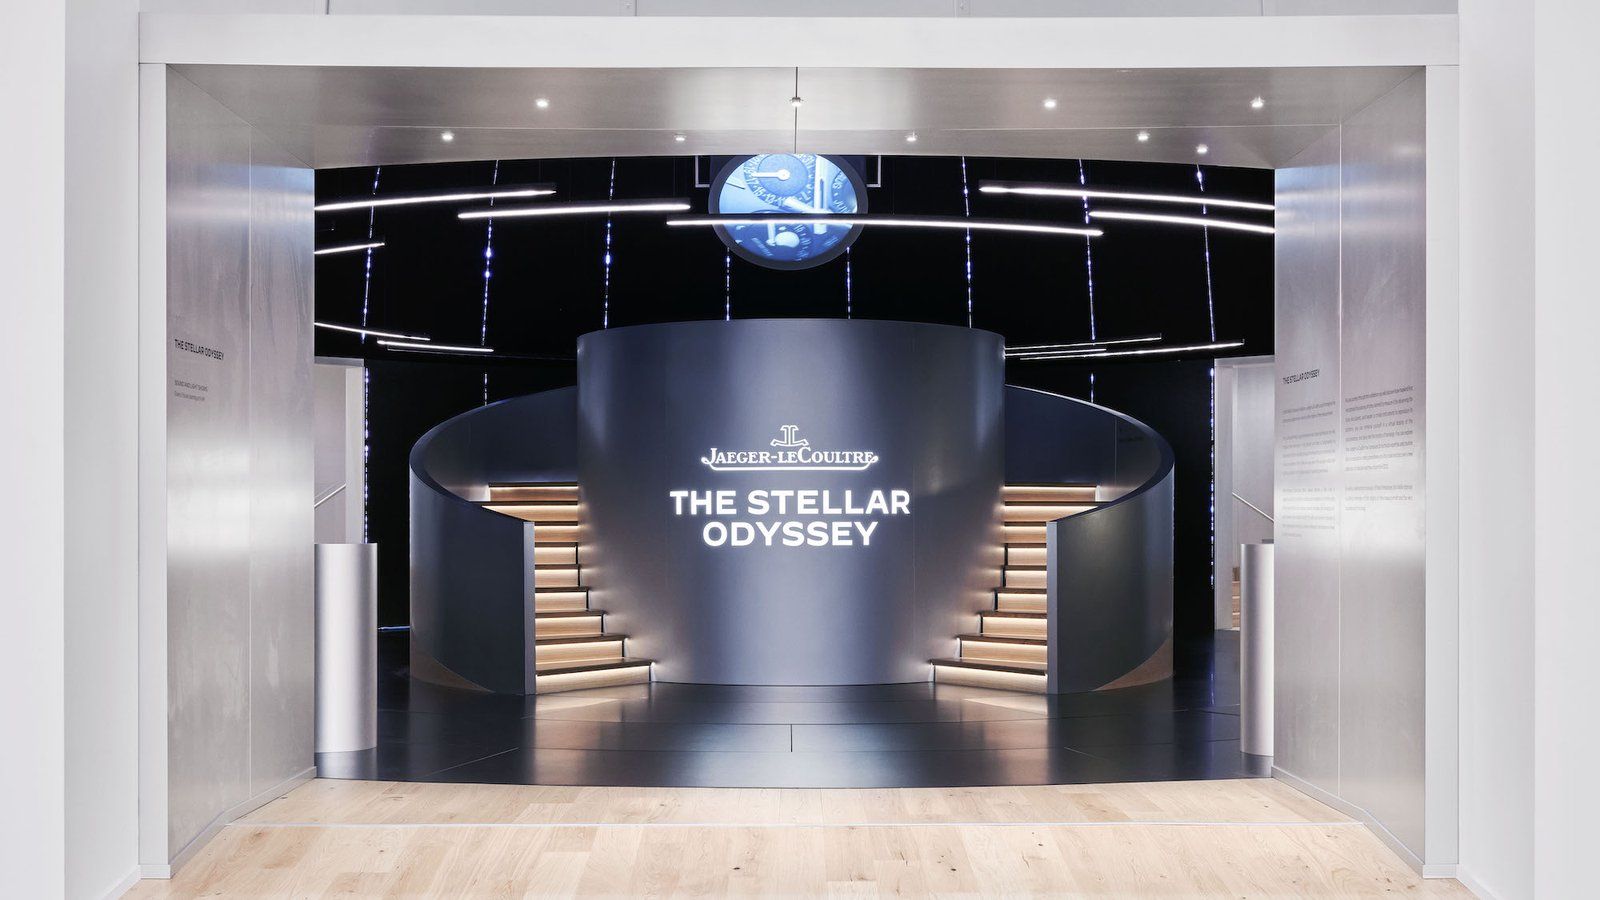 The Jaeger-LeCoultre booth - The Stellar Odyssey